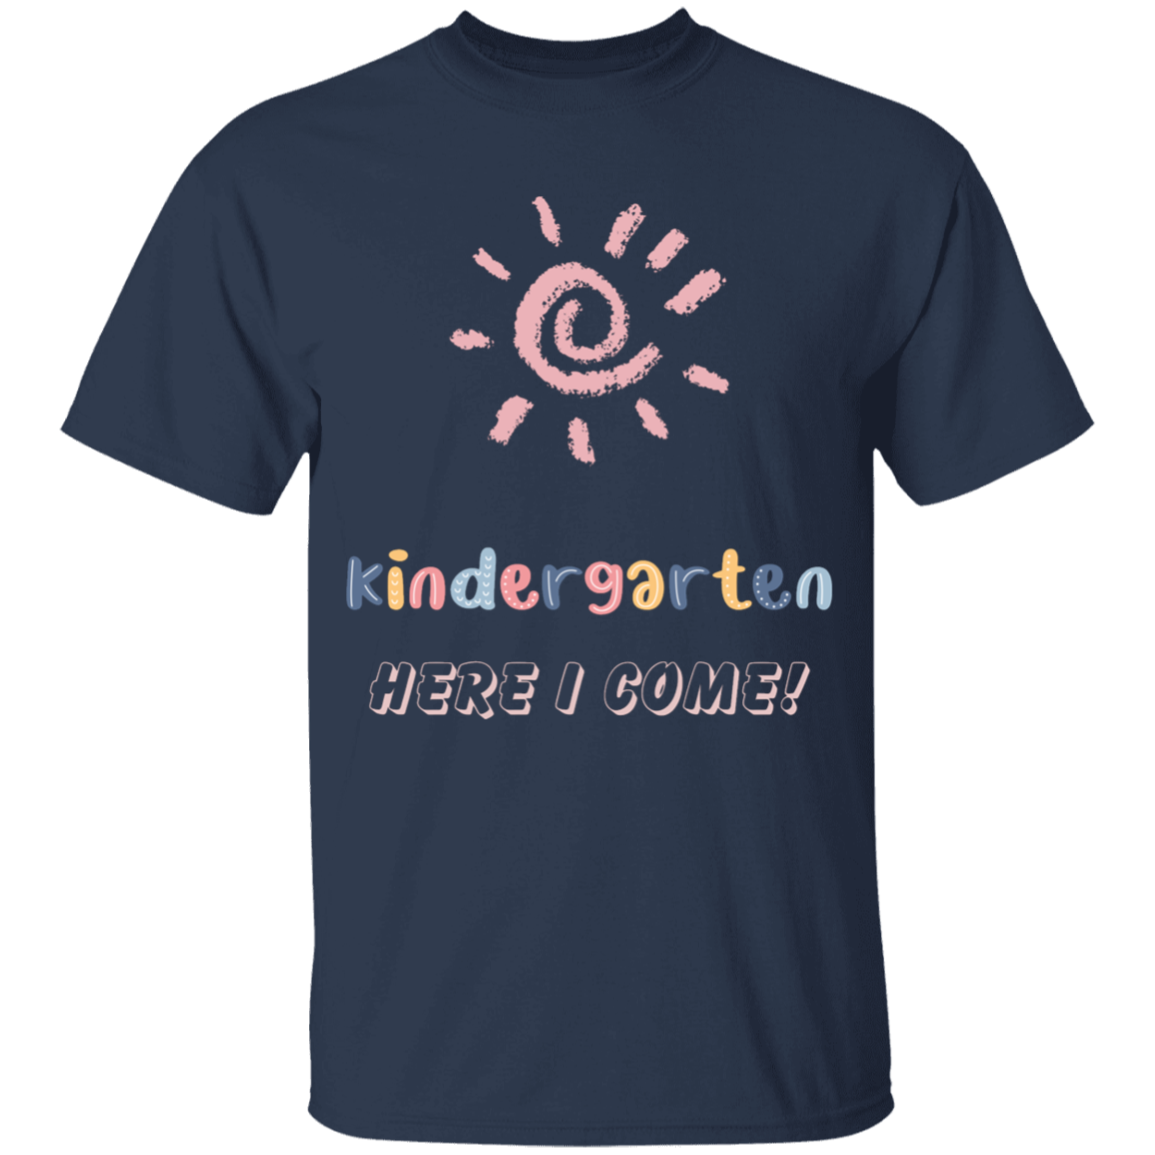 Get trendy with Youth kindergarten here I come! Tee Shirt - T-Shirts available at Good Gift Company. Grab yours for $20.42 today!